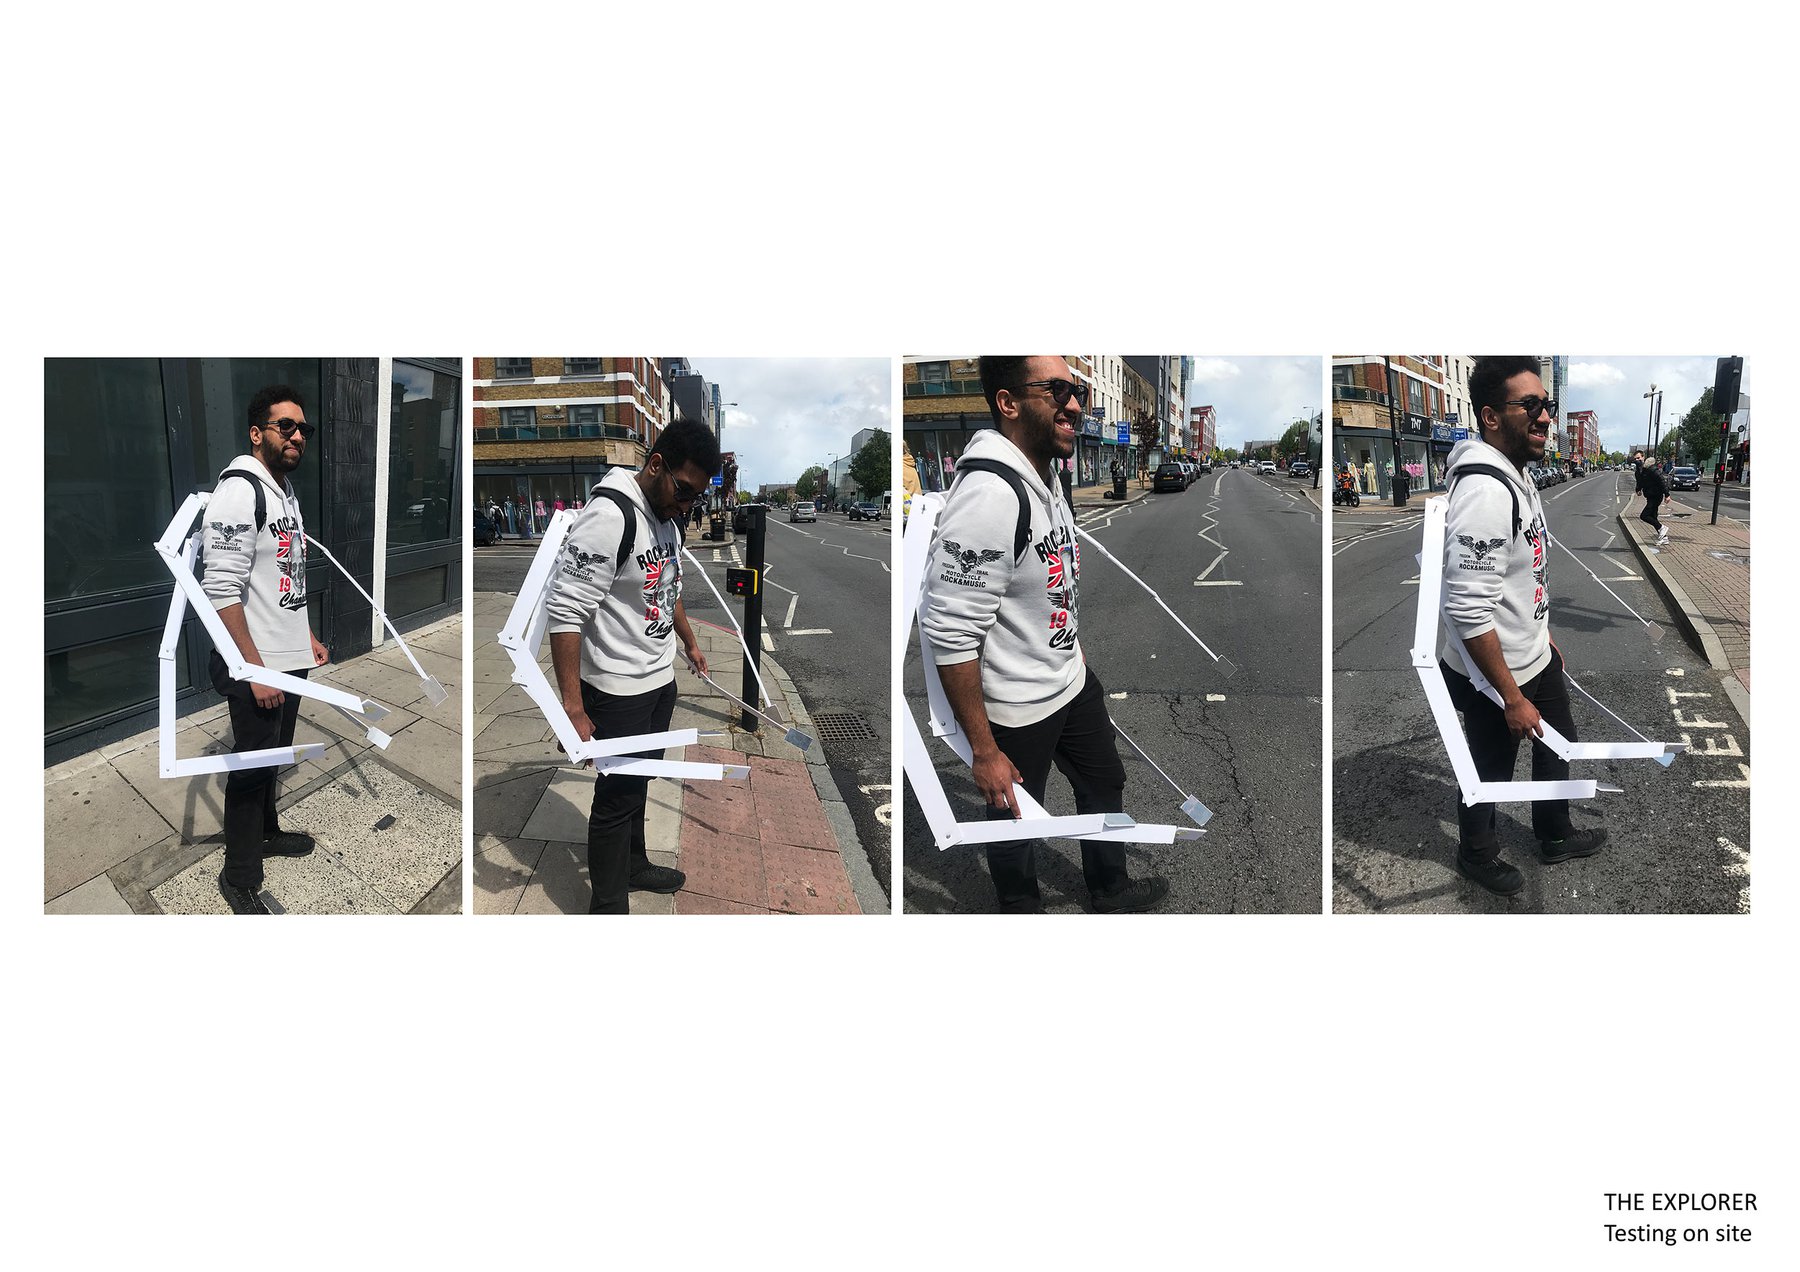 A male model crosses the street in a series of 4 images wearing a white device on their back. The device has multiple arms that flex around the body. It looks similar to the legs of a spider